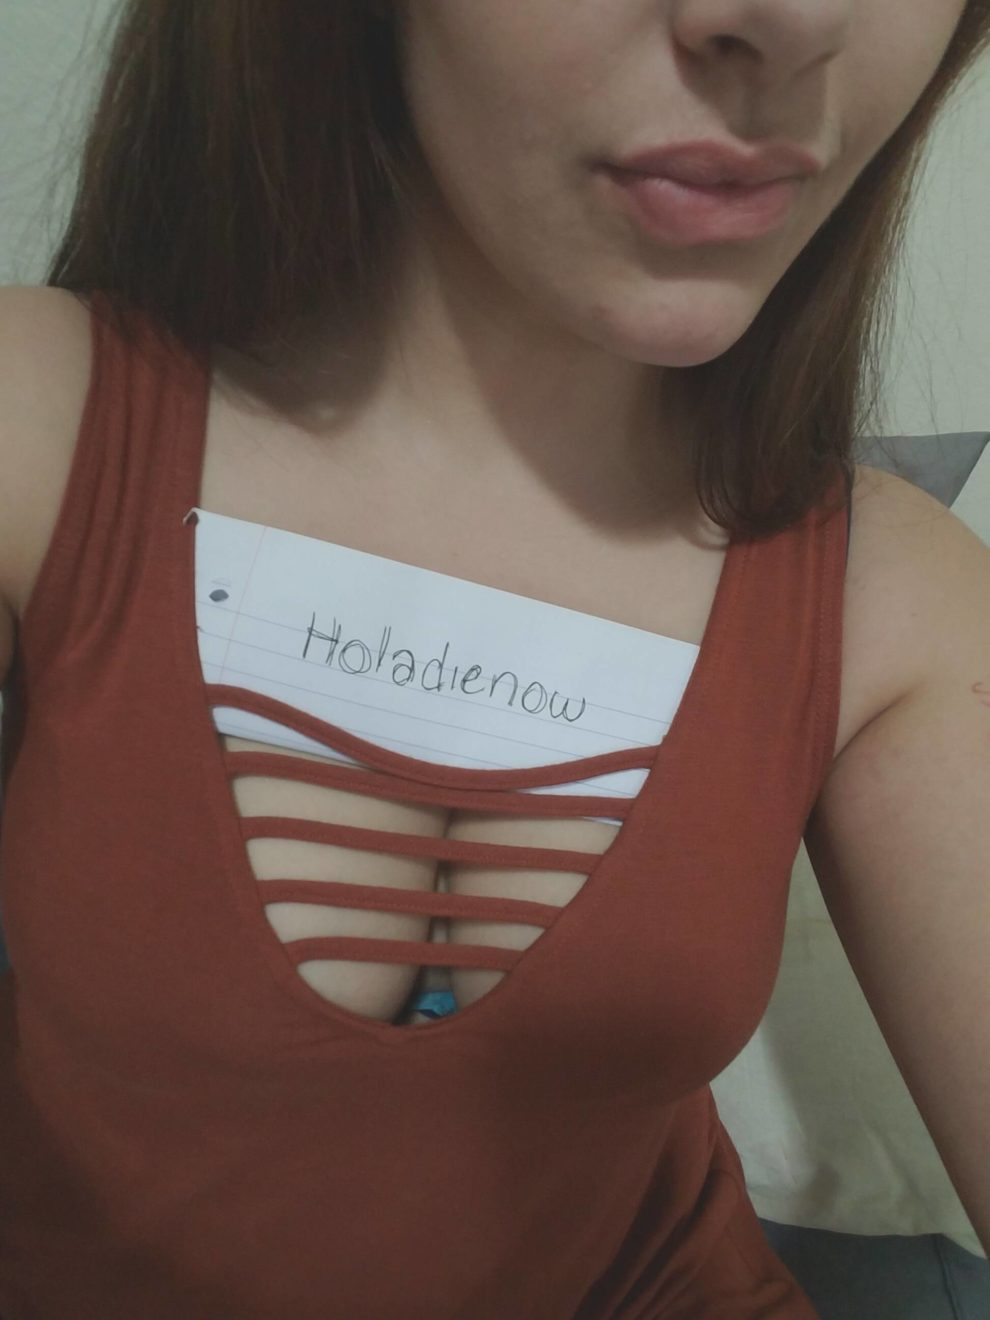 Verification. New in town. f20.